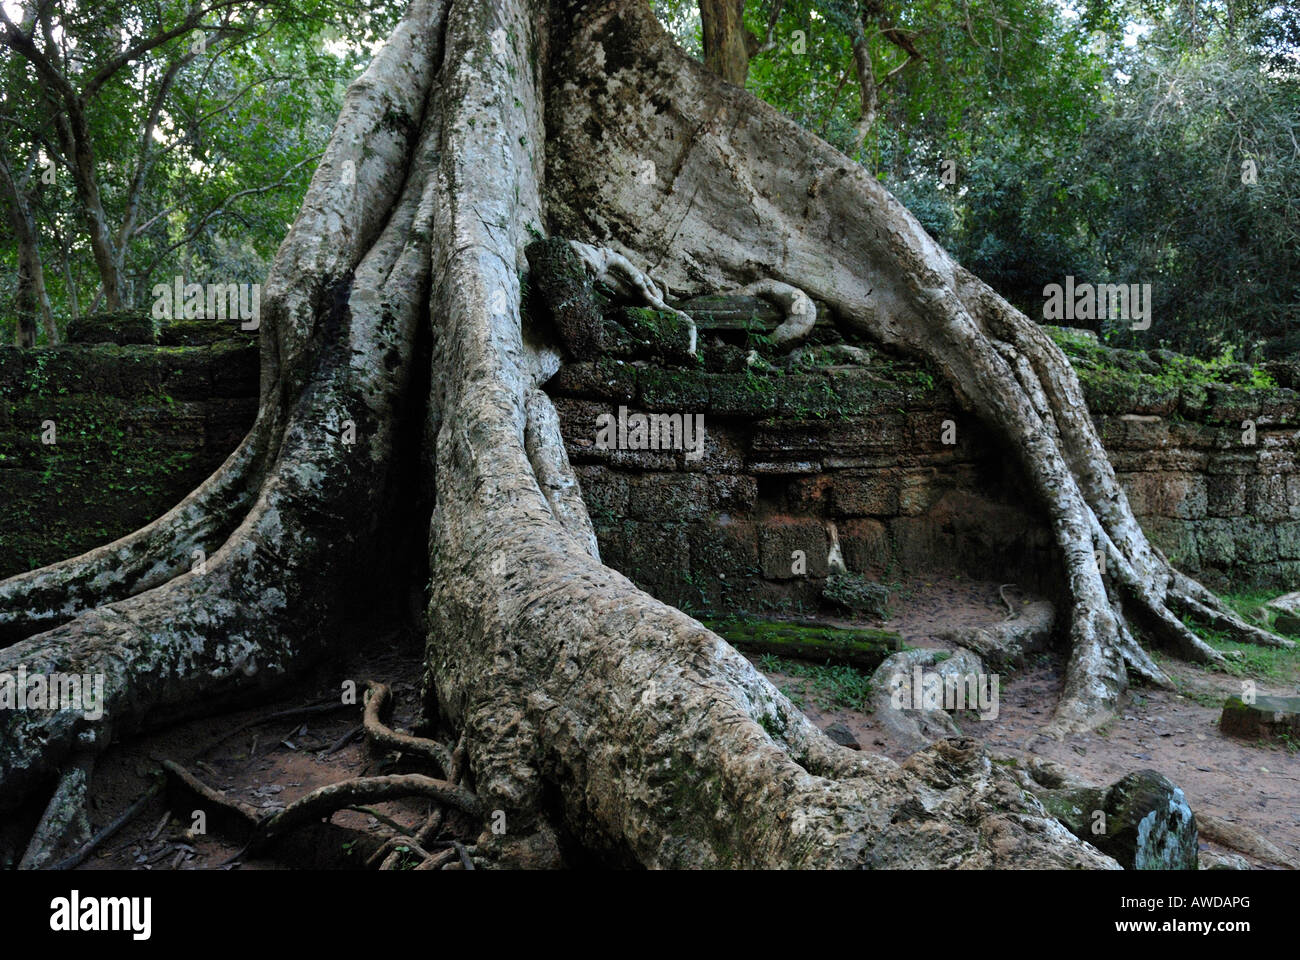 Rainforest growing over the ruins of the ancient tempels of Angkor, Cambodia Stock Photo